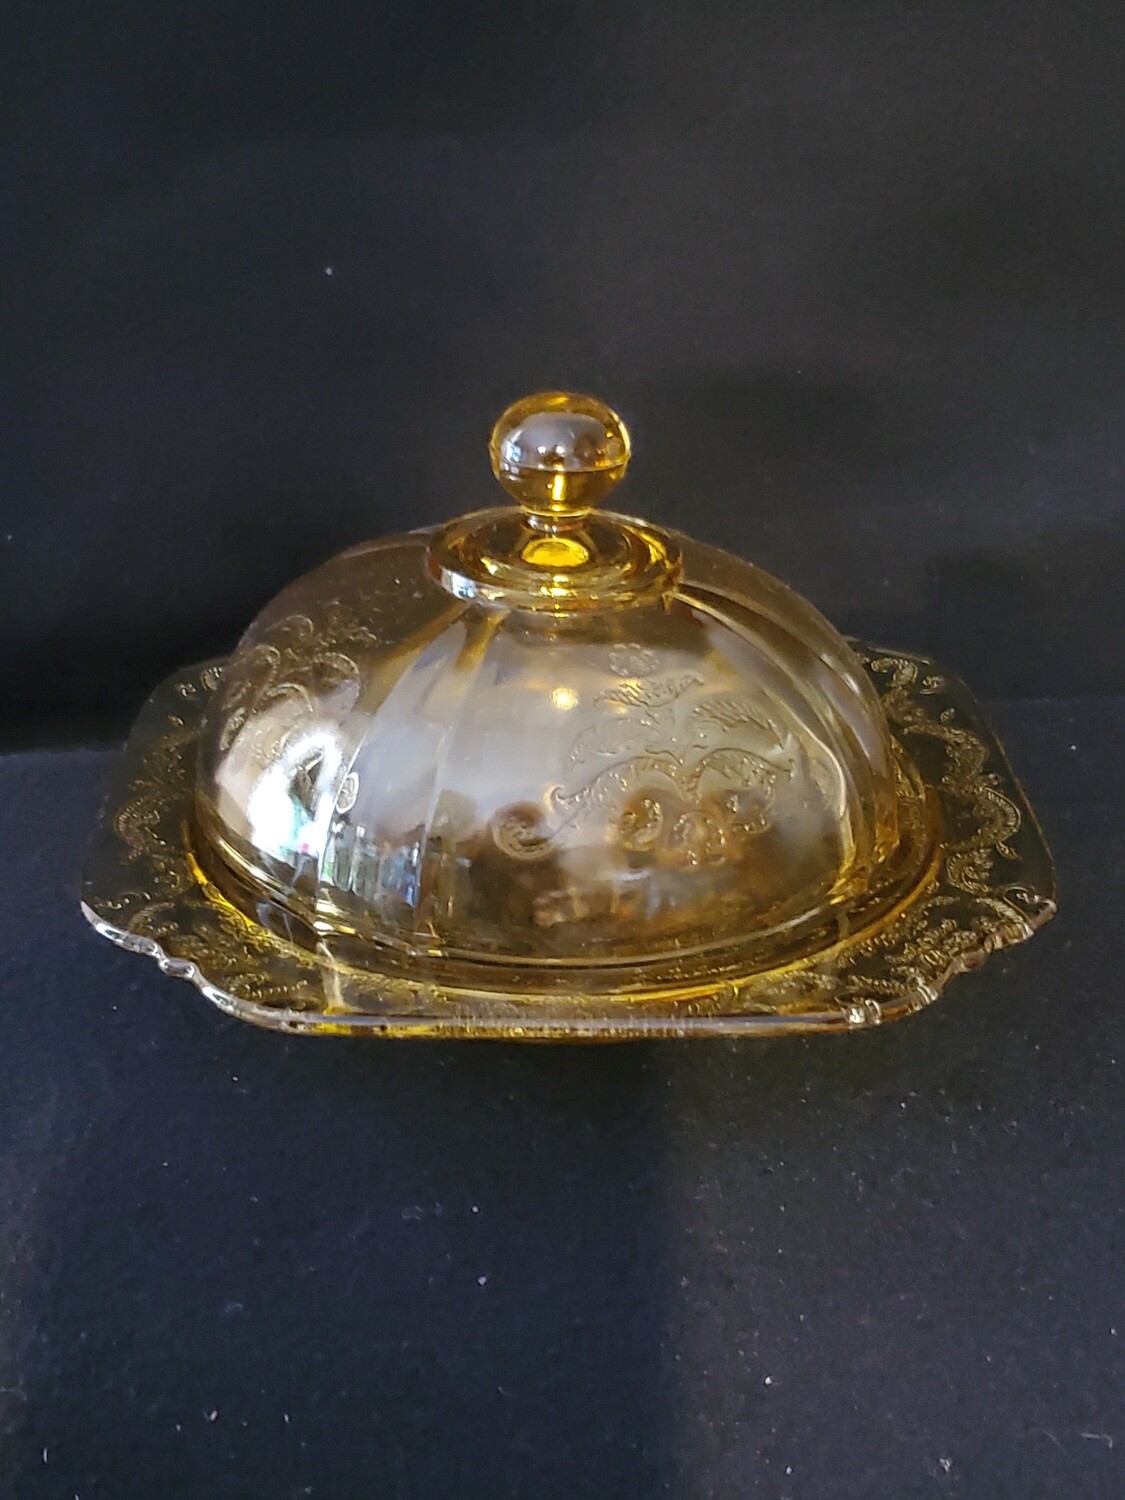 Vintage, Covered Butter Dish, Madrid Amber Depression Glass by Federal Glass